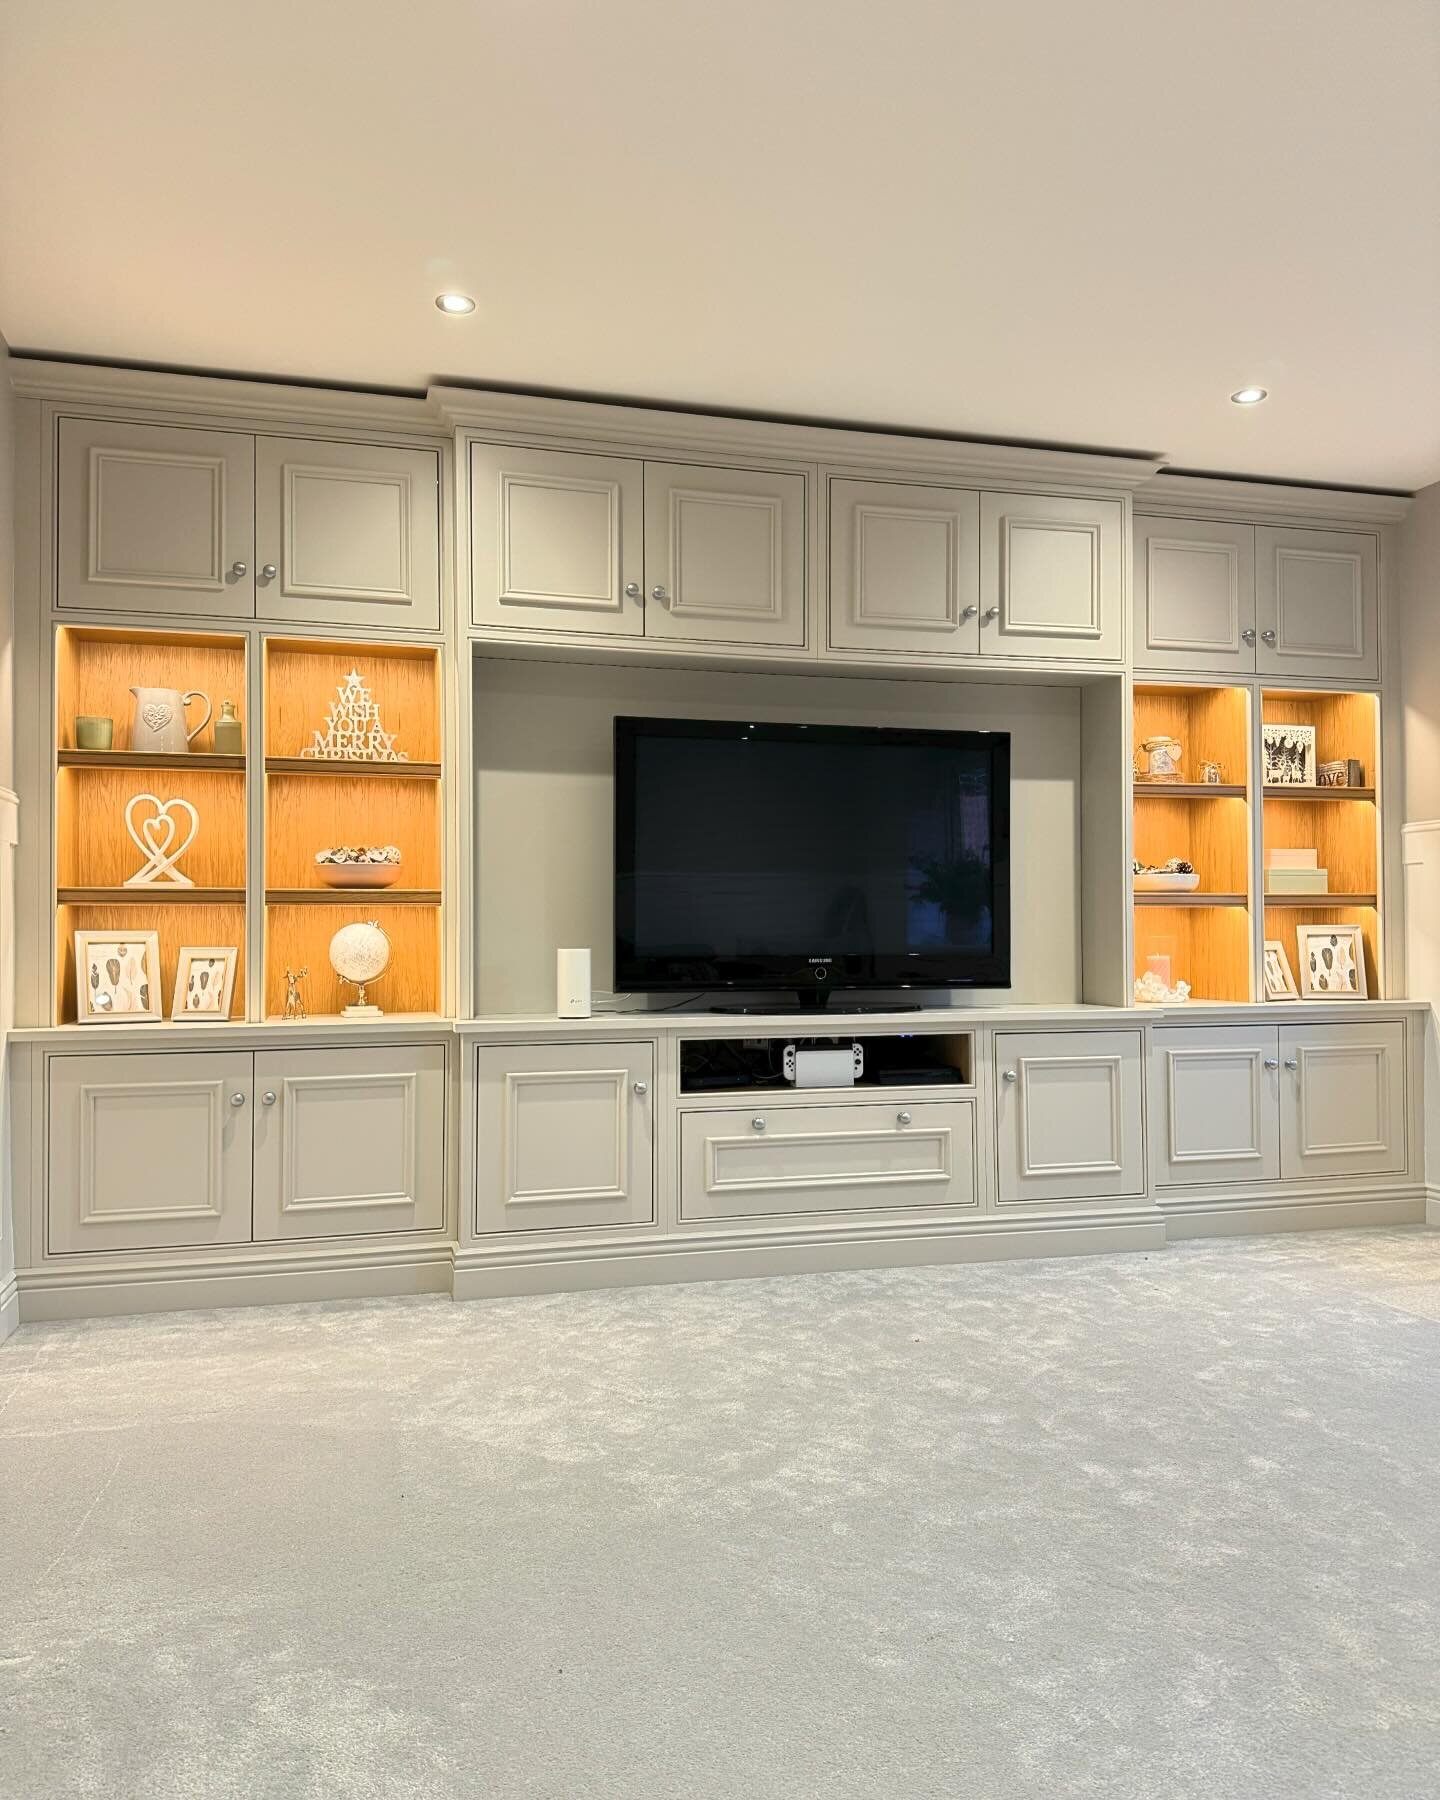 It was lovely to pop back to take another look at this stunning in-frame media unit now that the customer has added their finishing touches to it 😊
Sprayed in @farrowandball &ldquo;Cornforth white&rdquo; by @sprayfinishes 

3D visuals provided by @a